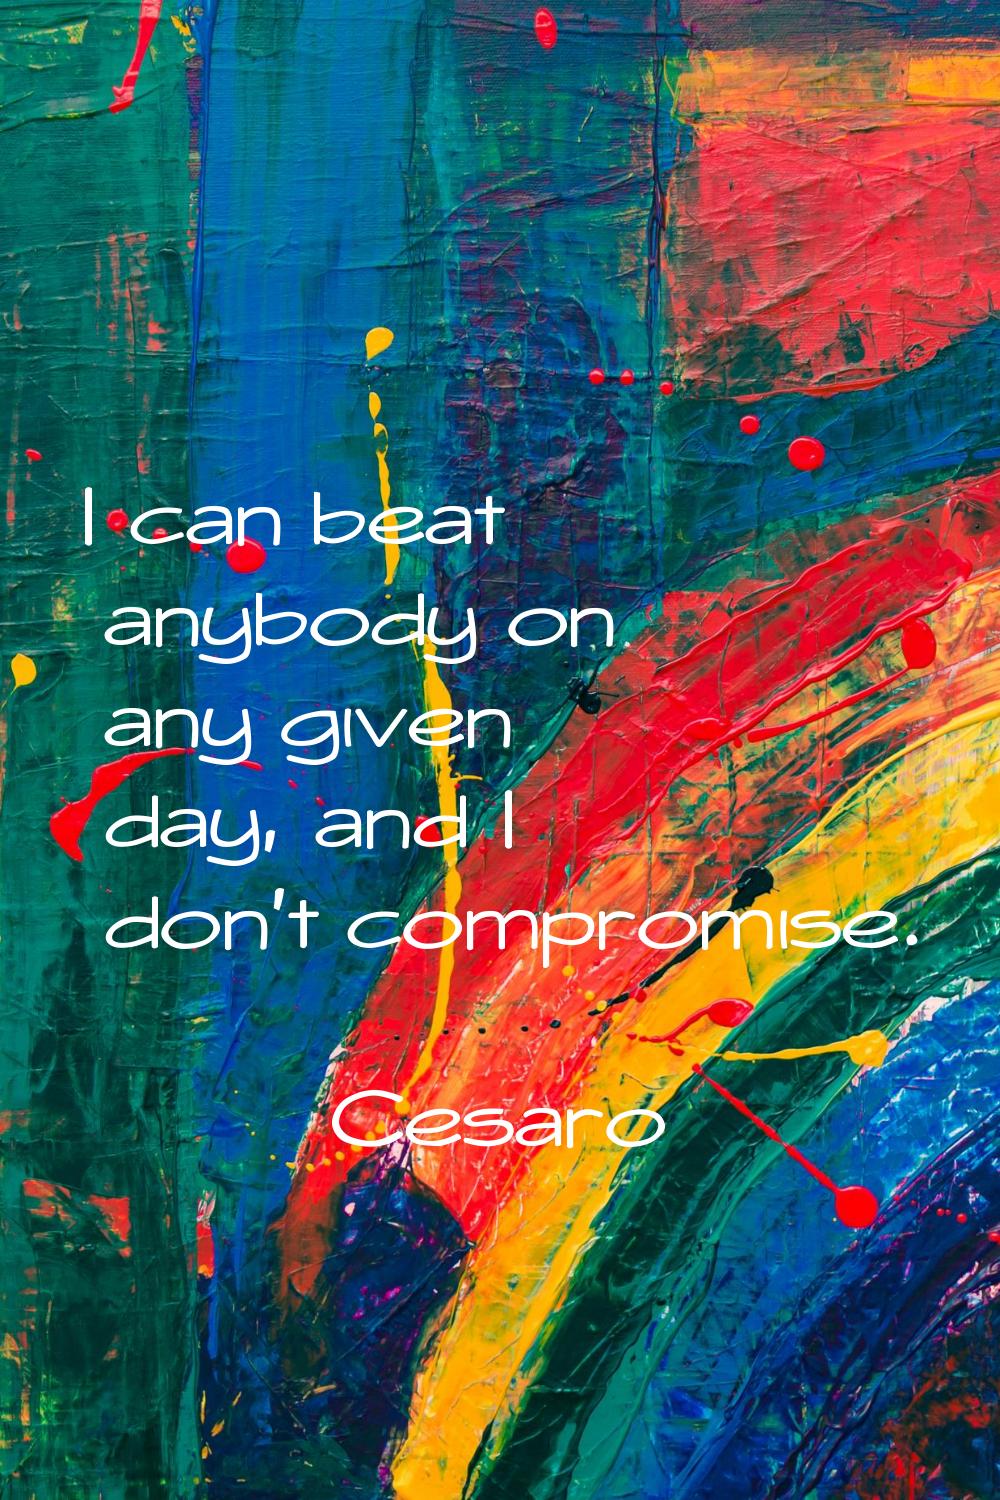 I can beat anybody on any given day, and I don't compromise.